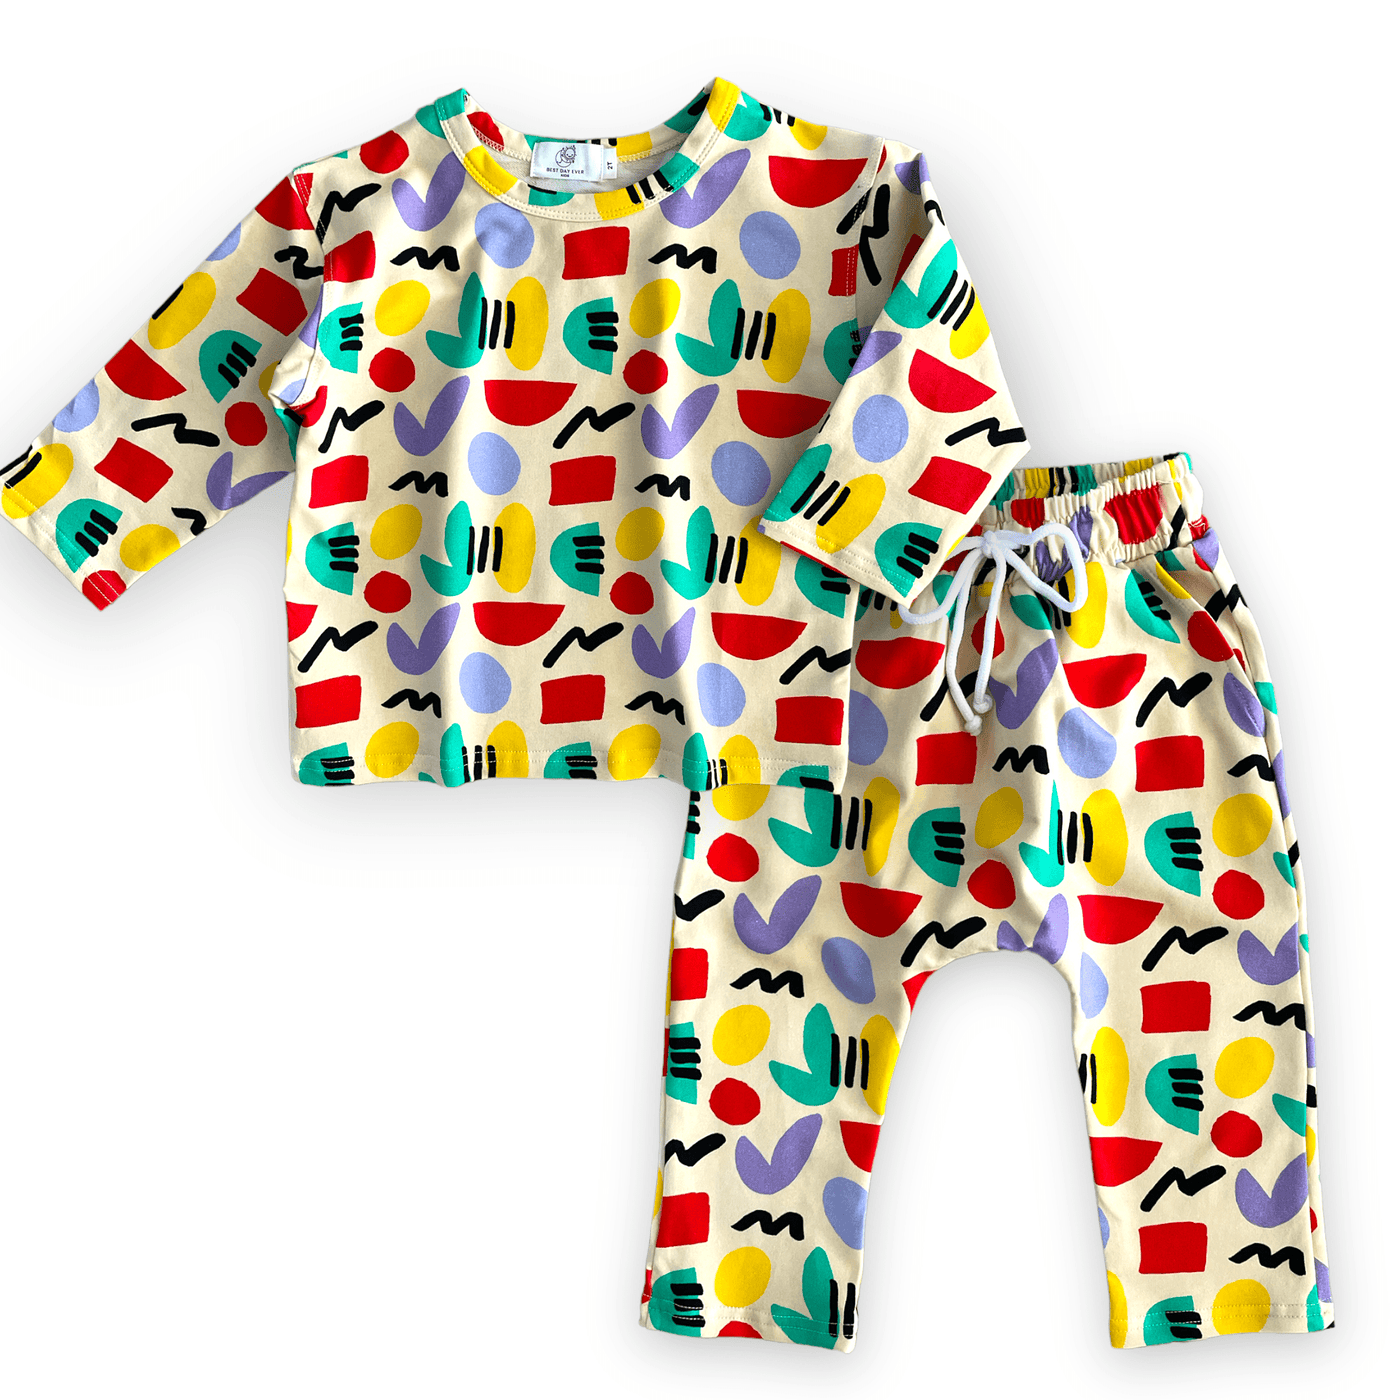 Best Day Ever Kids Baby & Toddler Outfits Abstract Harem Sweat Set buy online boutique kids clothing